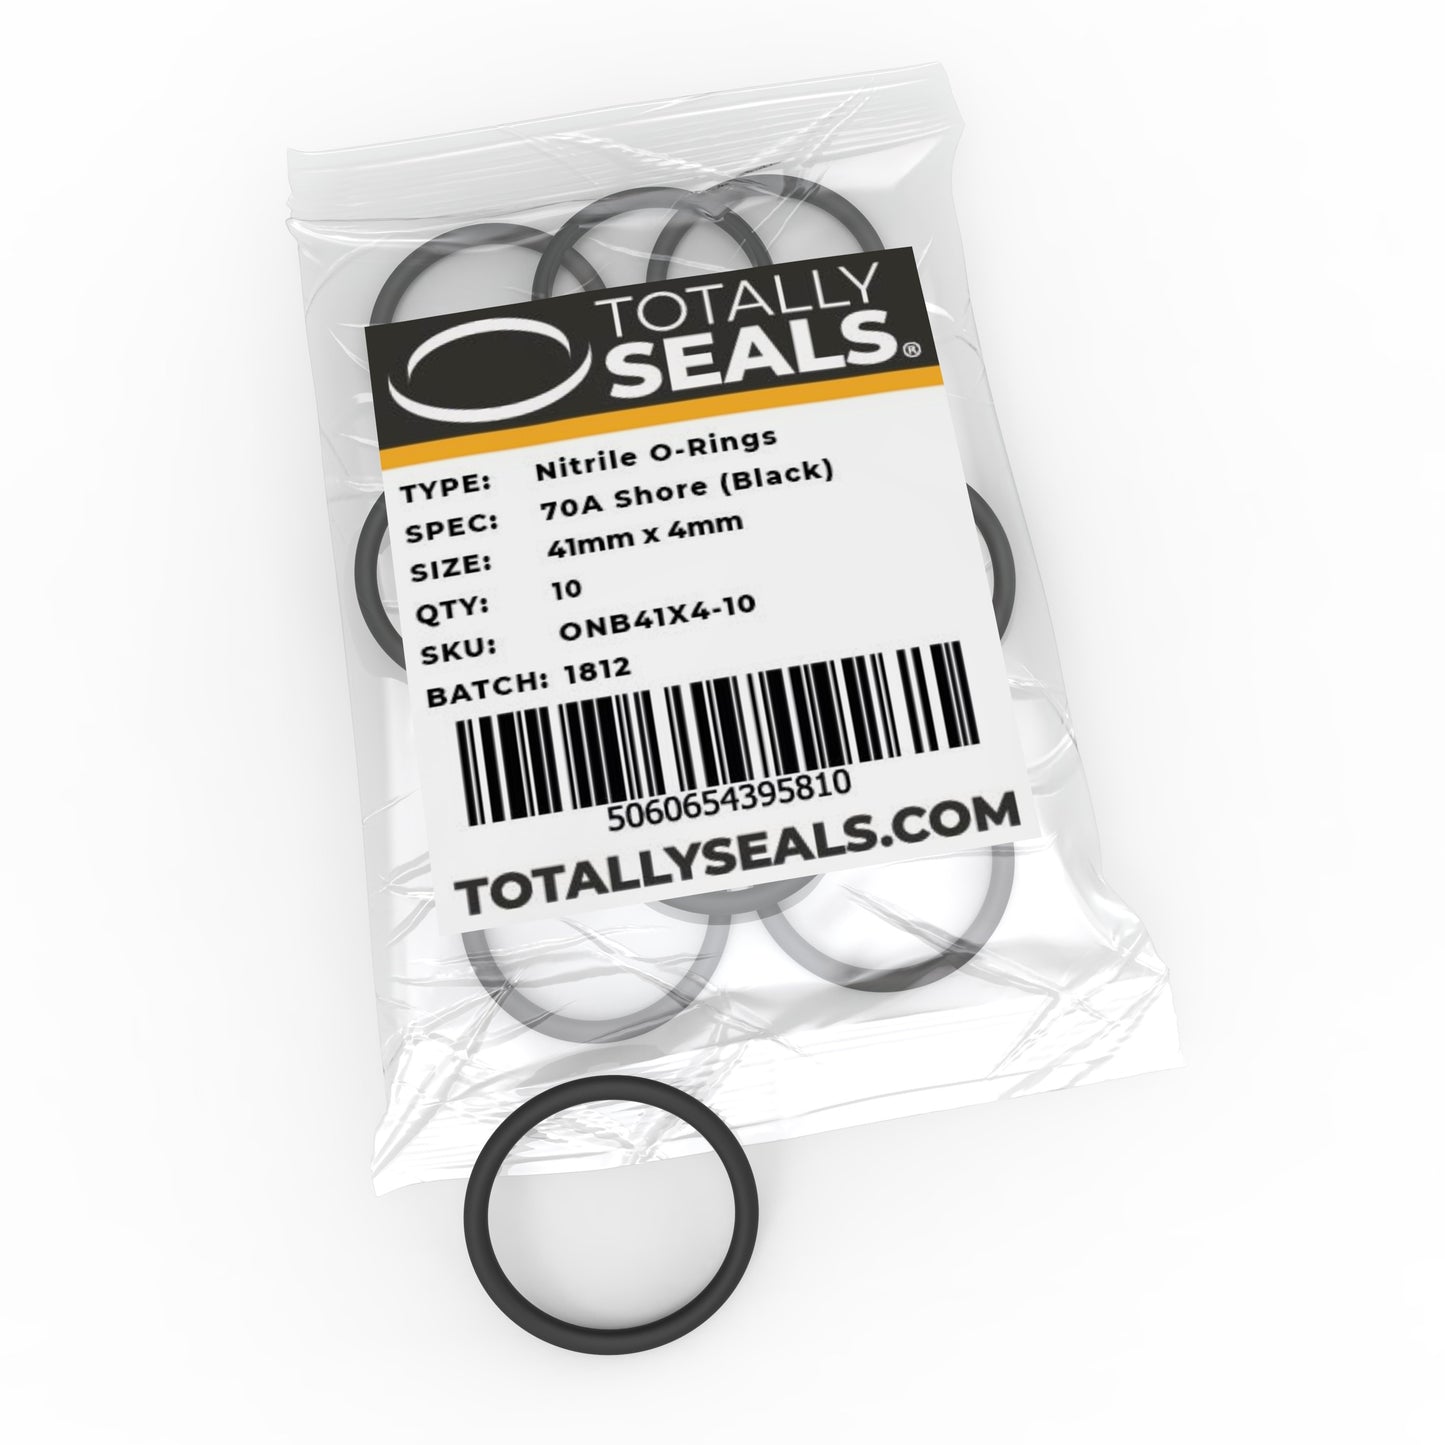 41mm x 4mm (49mm OD) Nitrile O-Rings - Totally Seals®